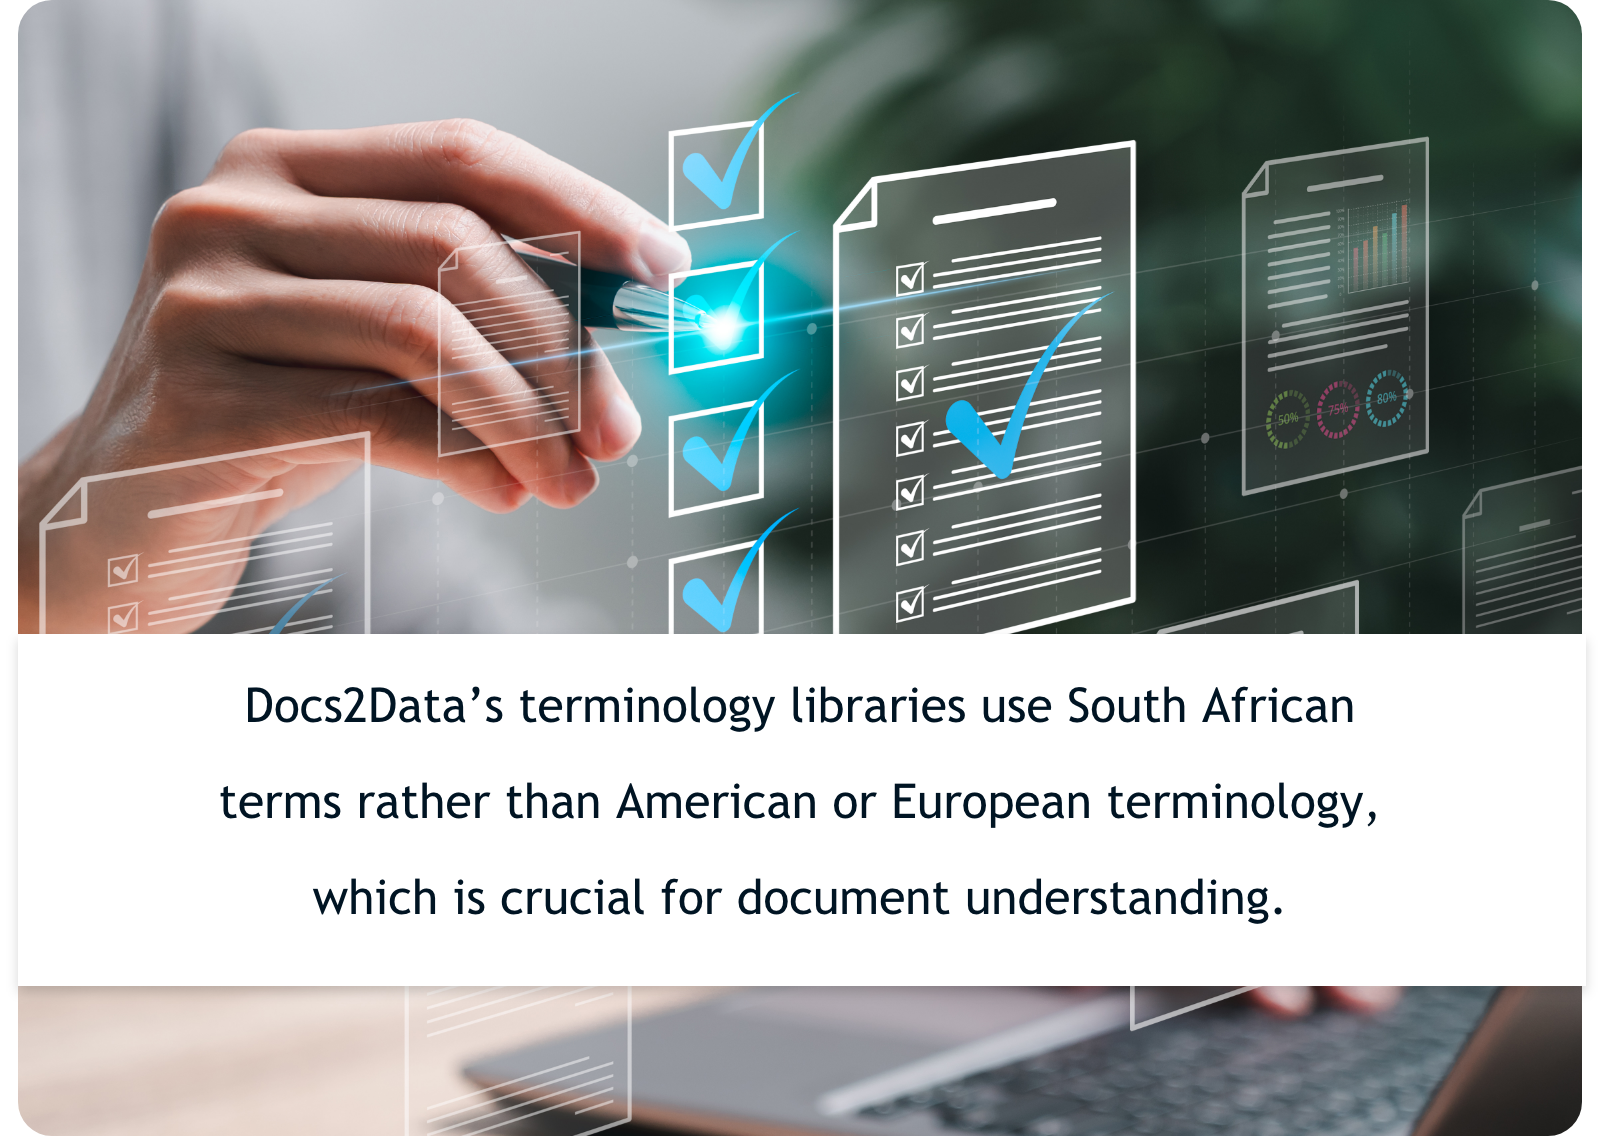 We can configure Docs2Data to your specific document understanding requirements and leverage our local automation team to integrate it into your business process.